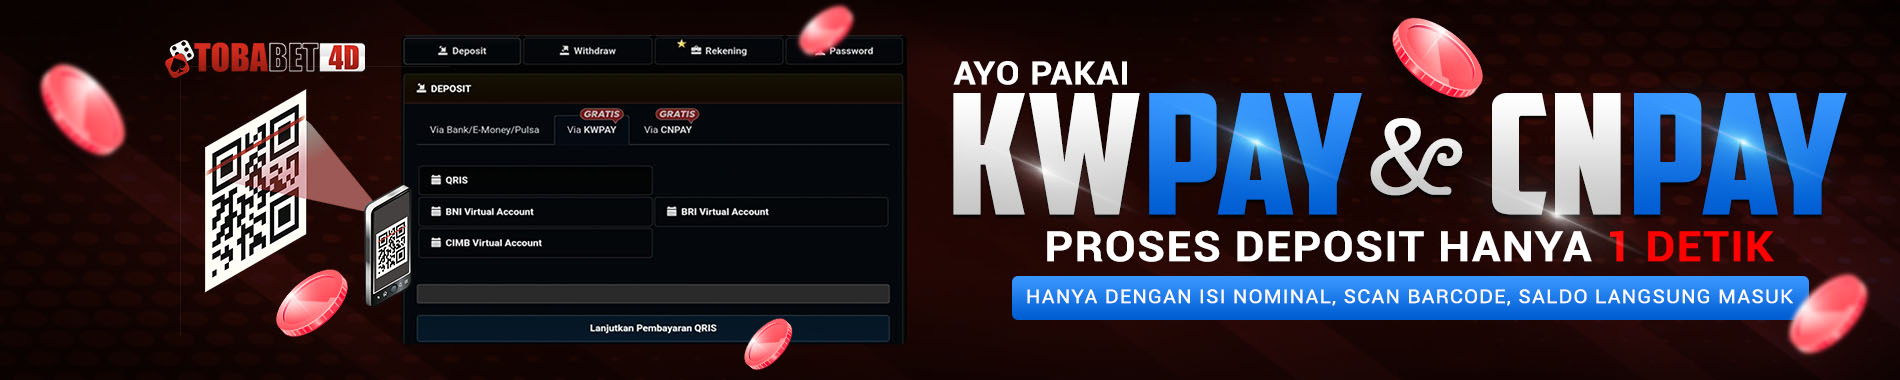 KWPAY